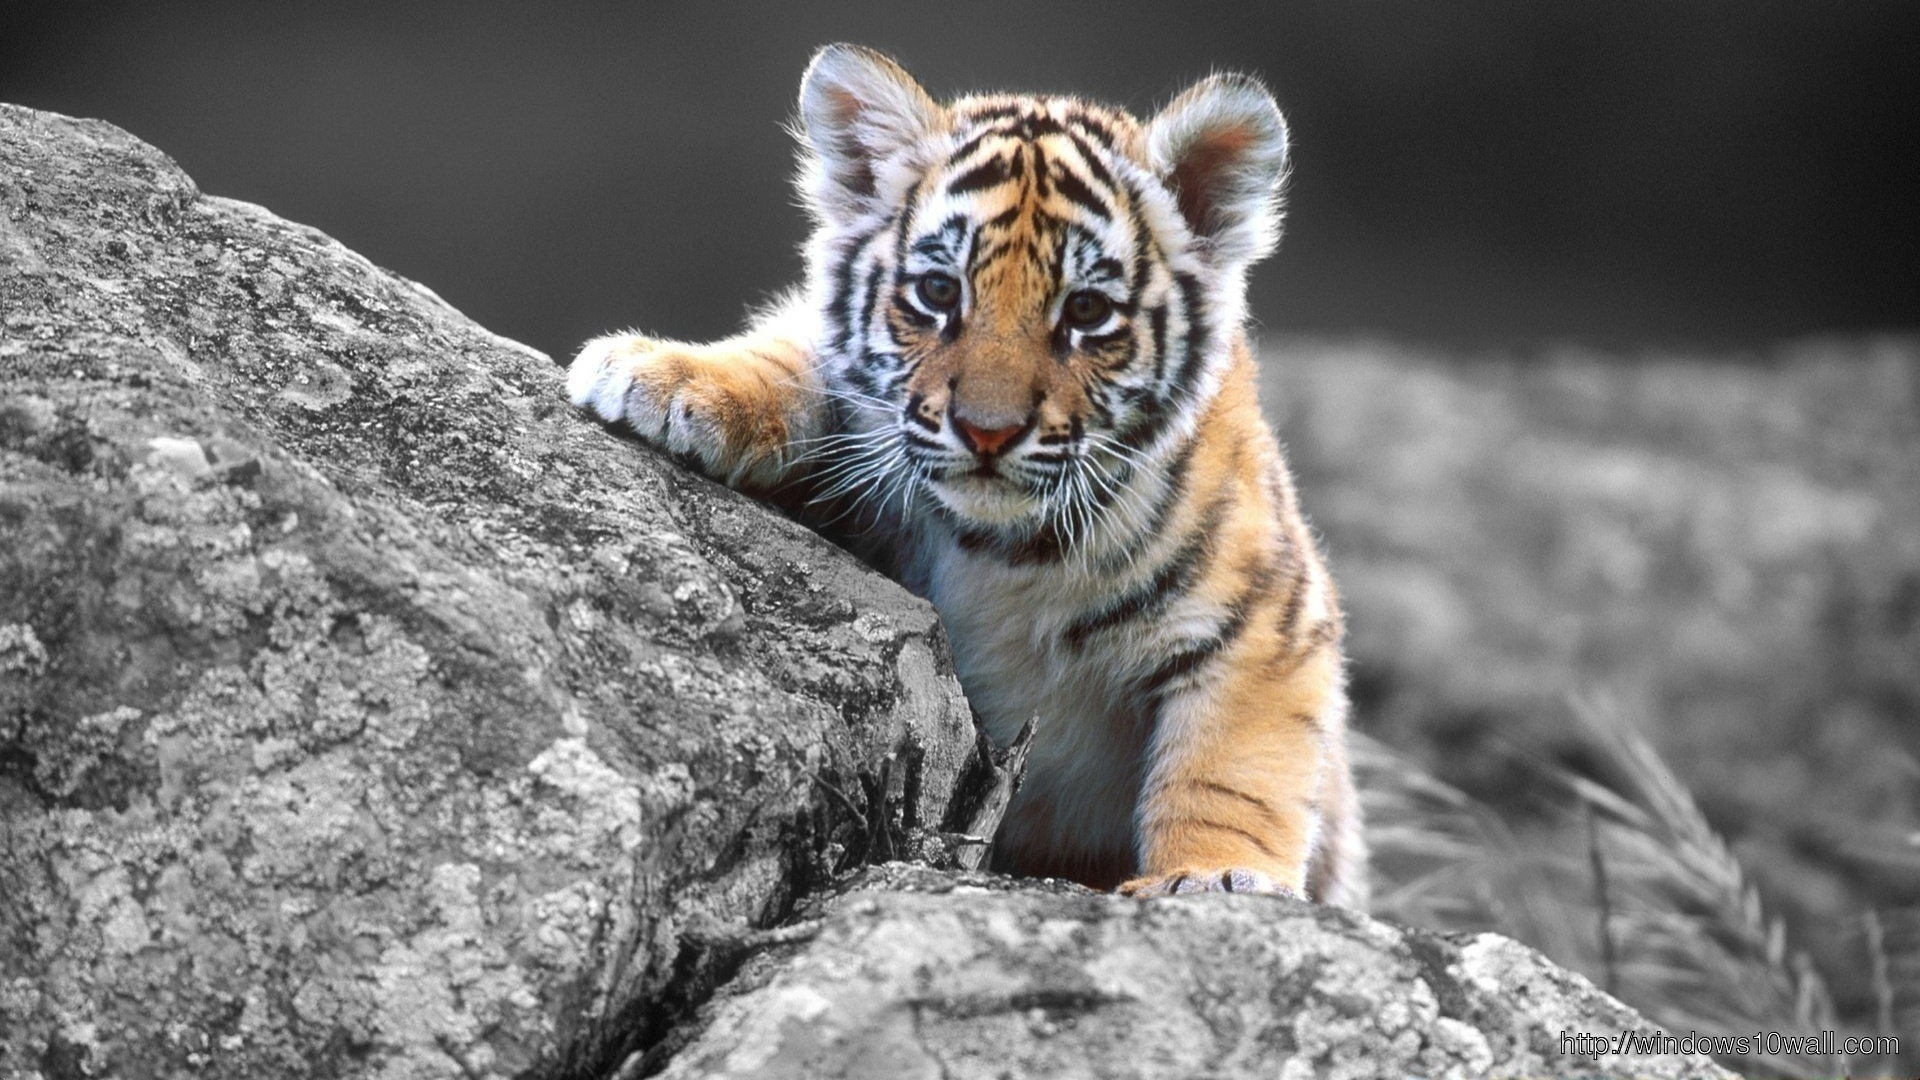 Bali Tiger Facts For Kids Wallpaper